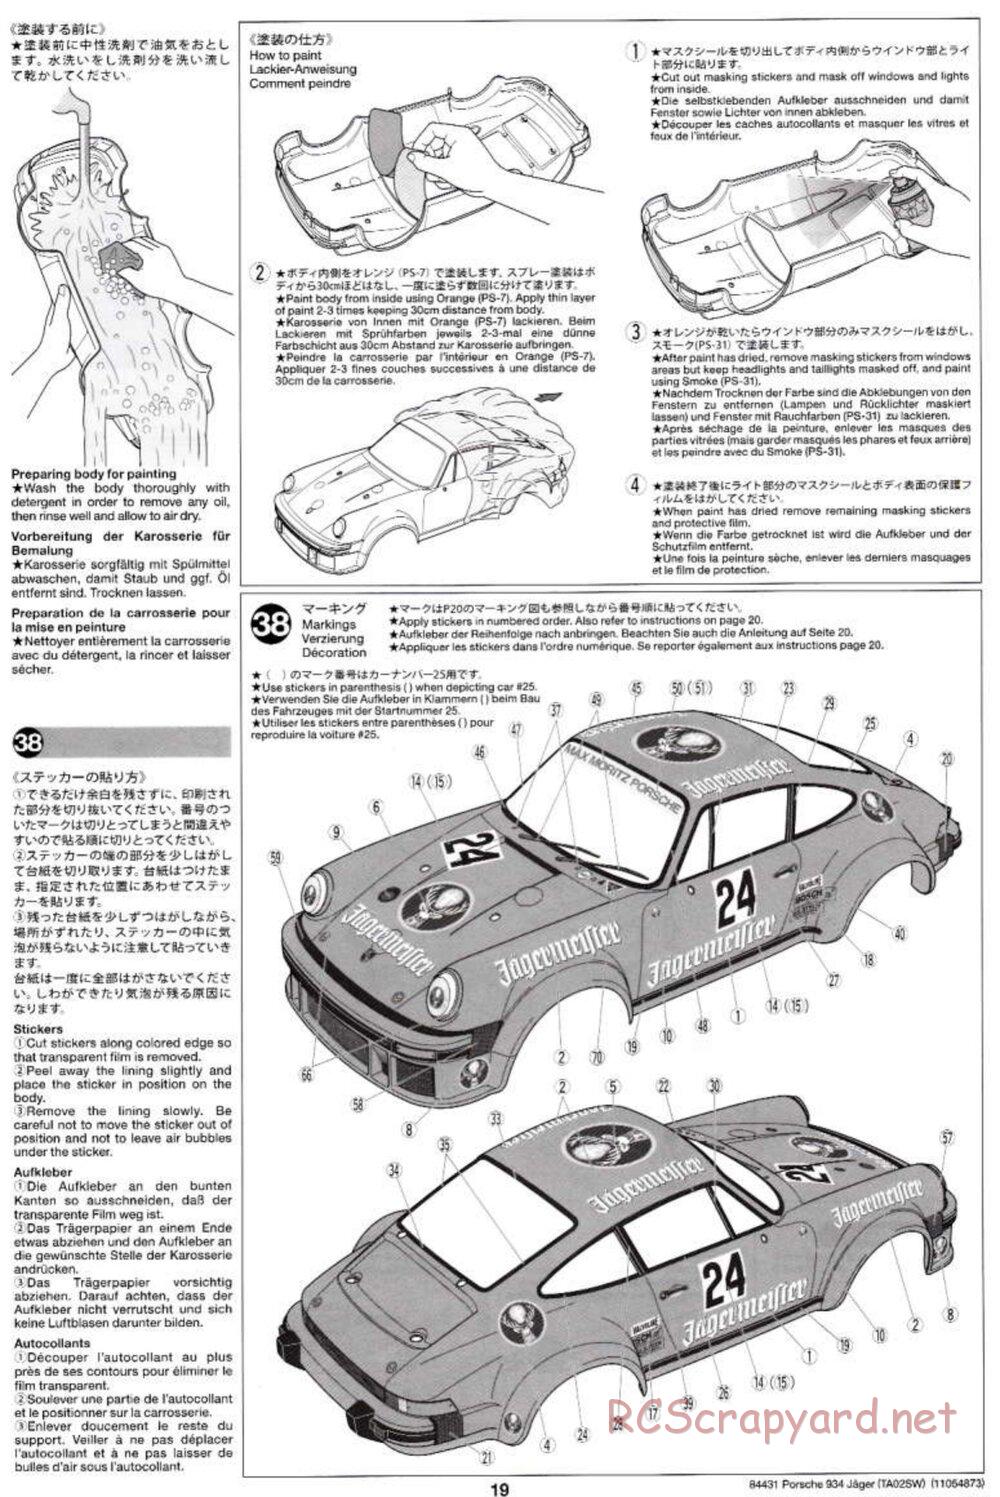 Tamiya - Porsche Turbo RSR Type 934 Jagermeister - TA-02SW Chassis - Manual - Page 19